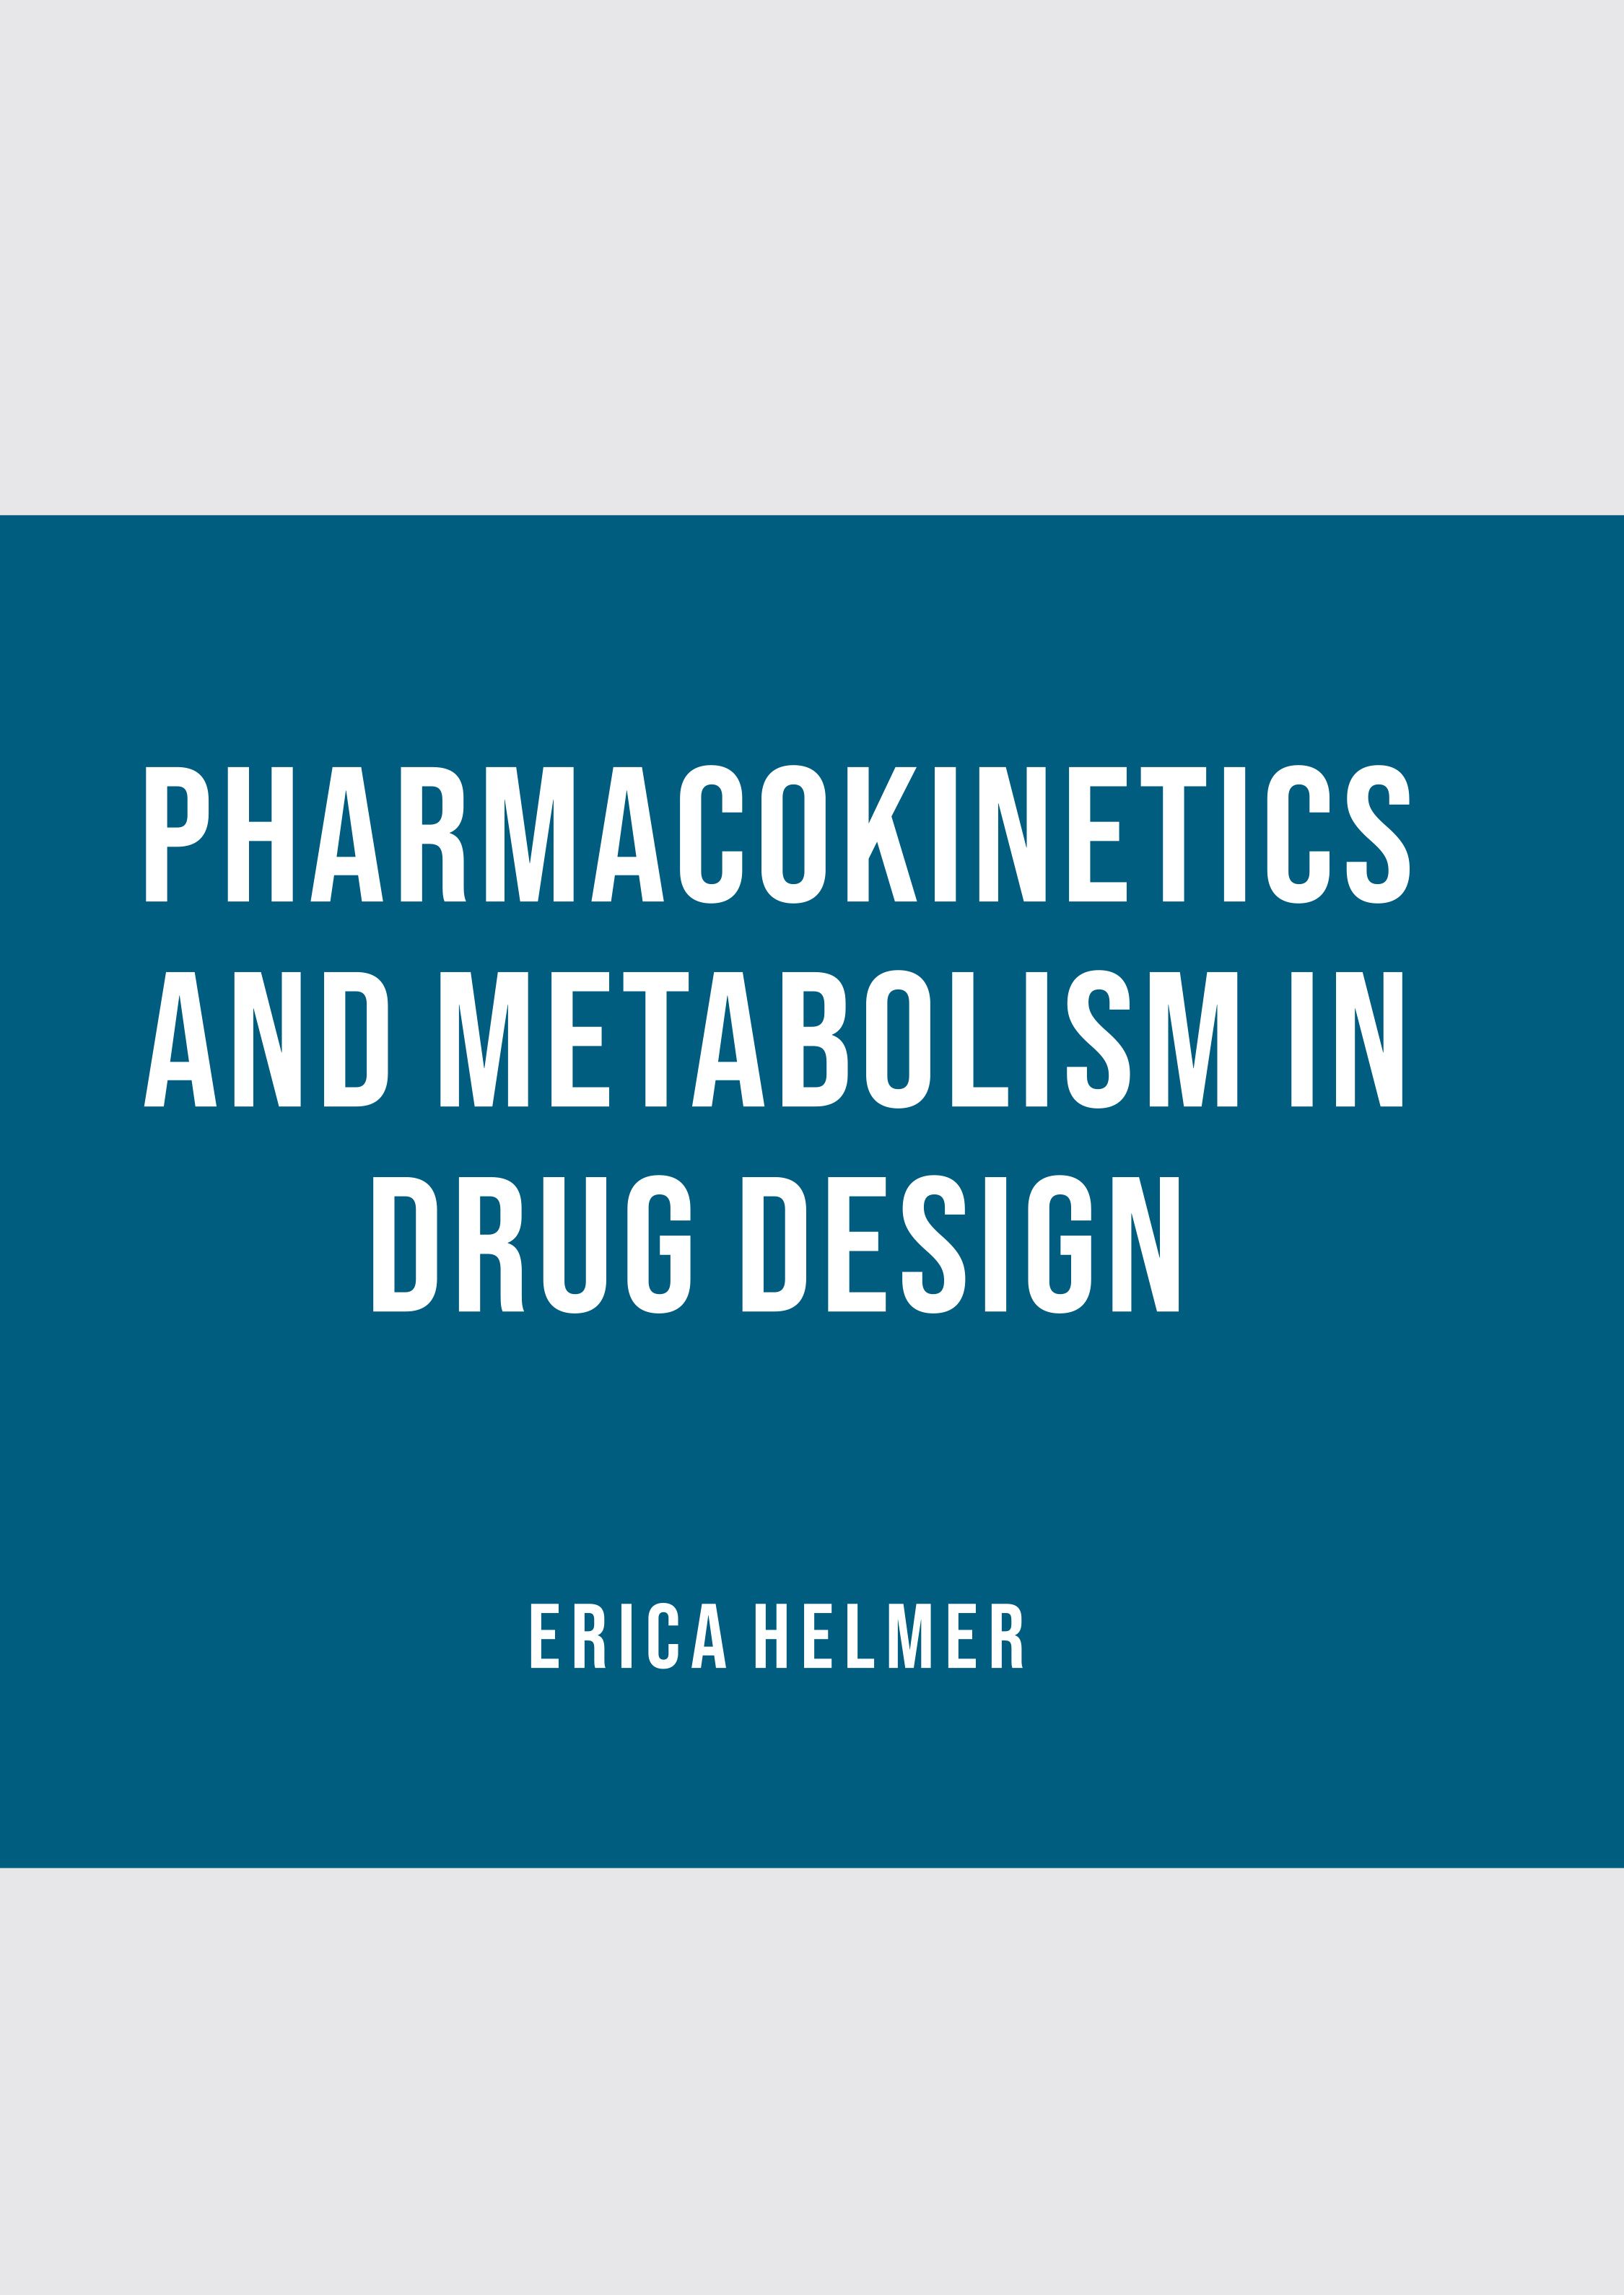 

exclusive-publishers/american-medical-publishers/pharmacokinetics-and-metabolism-in-drug-design-9798887403755